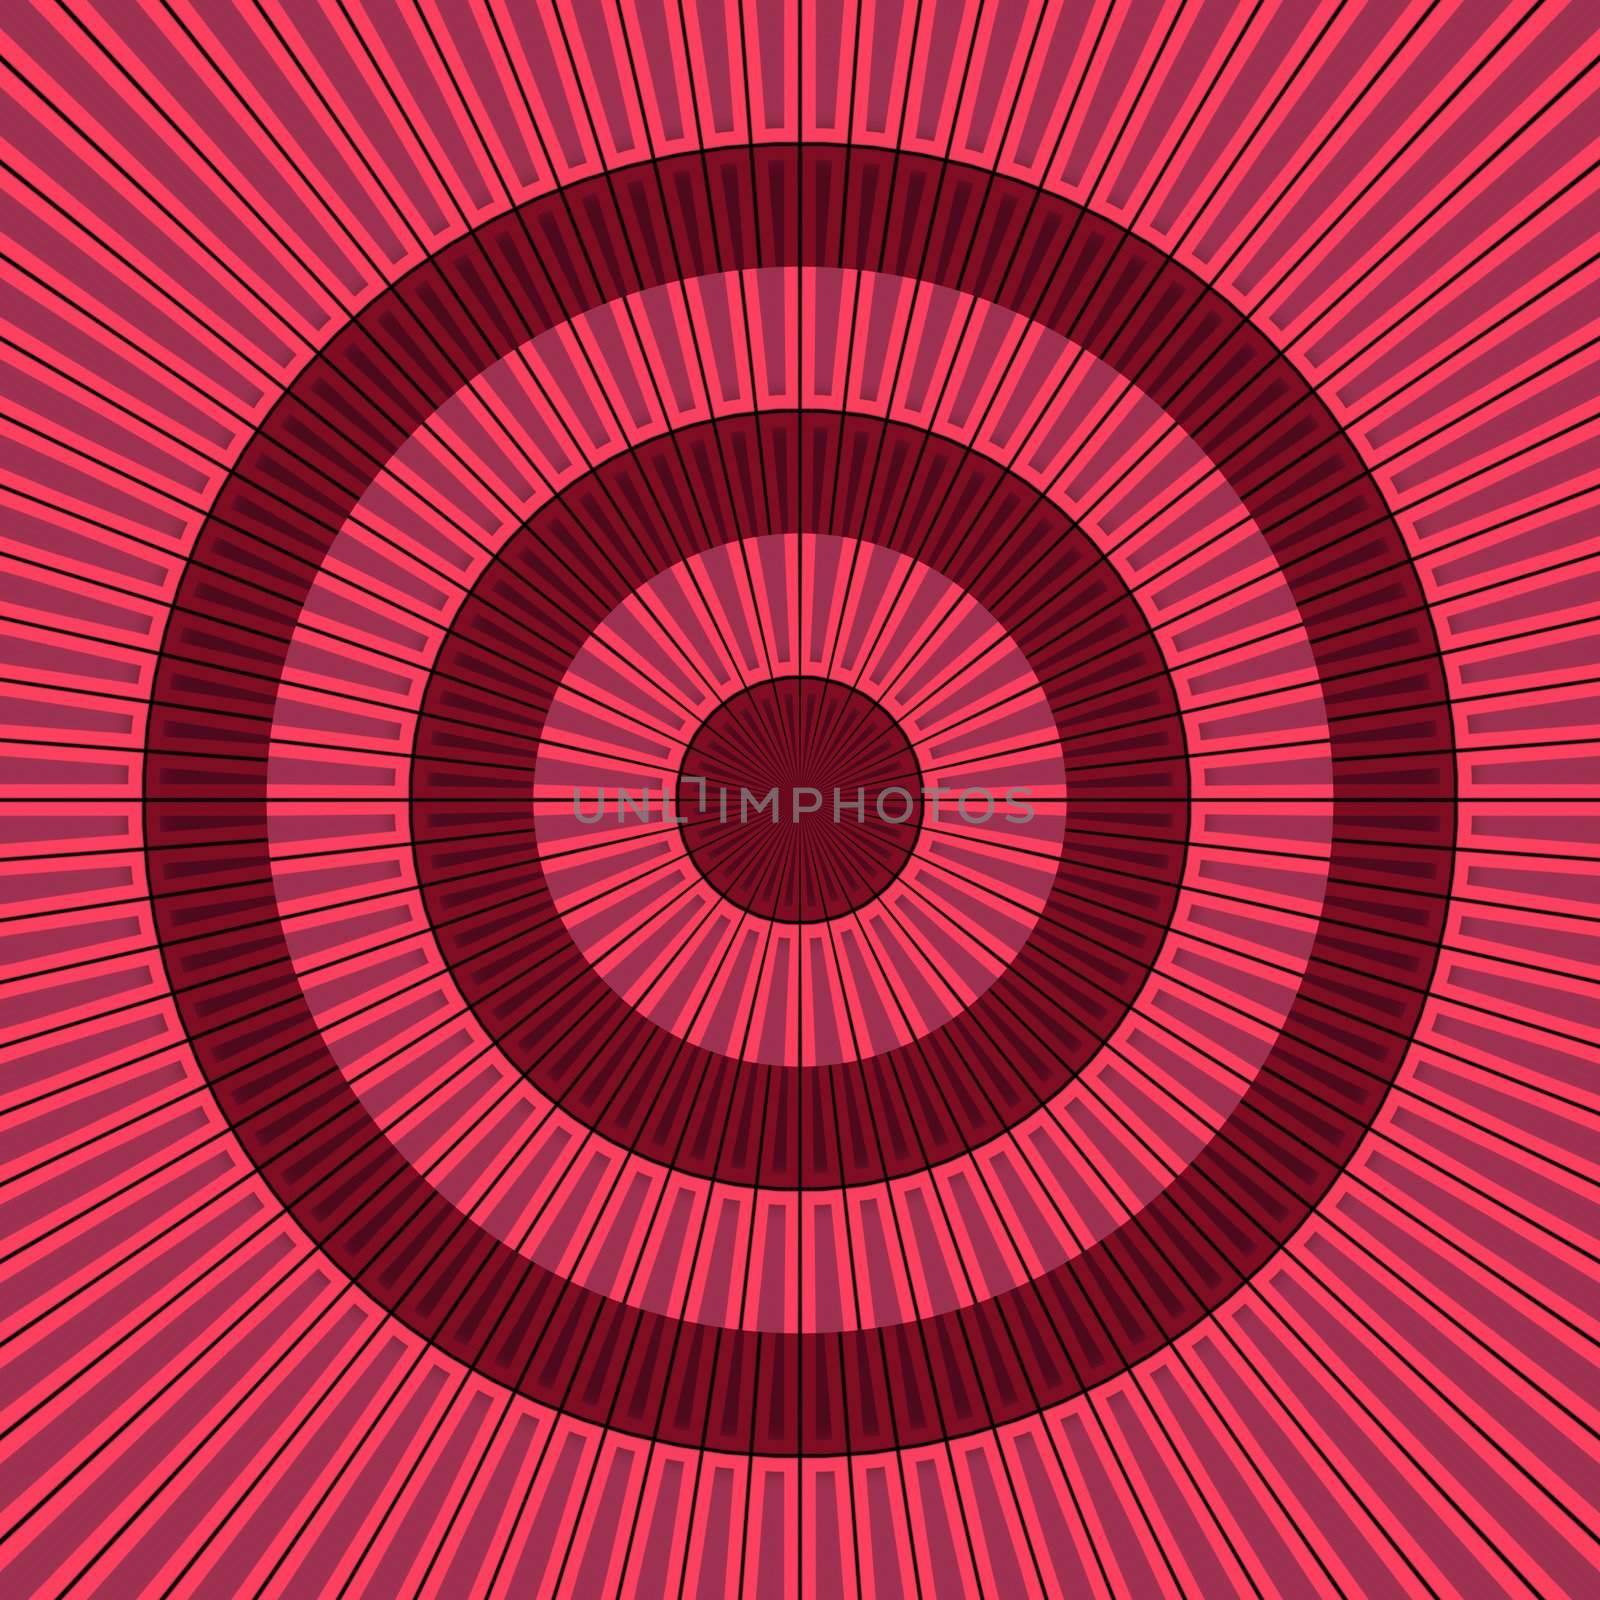 symbolic image of red rings and stripes from the centre